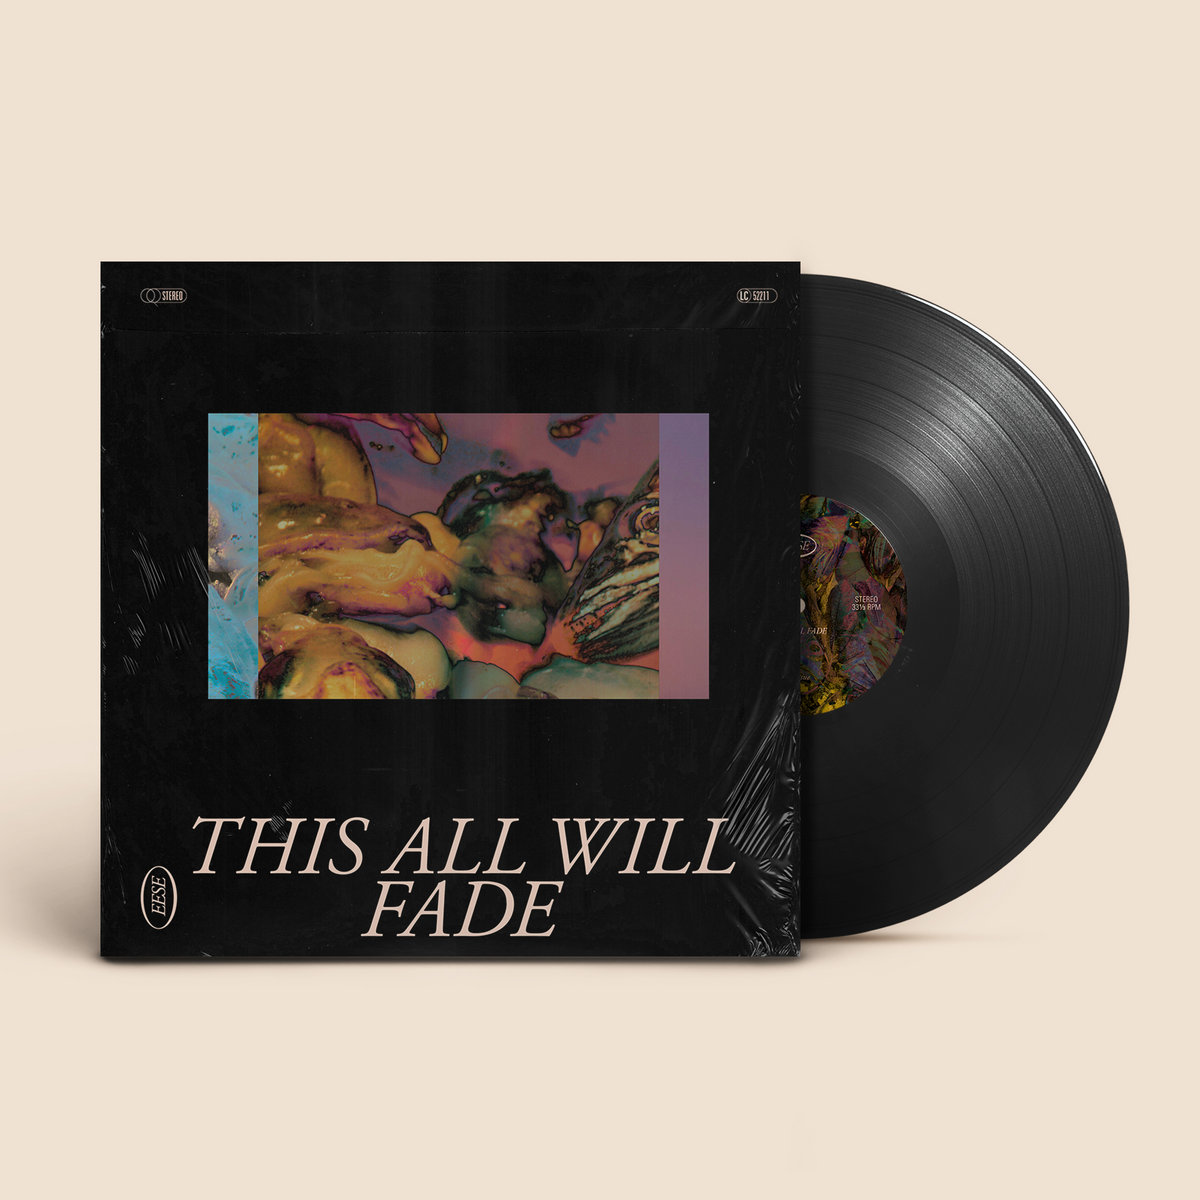 Out now: EESE’s “This All Will Fade” Vinyl LP